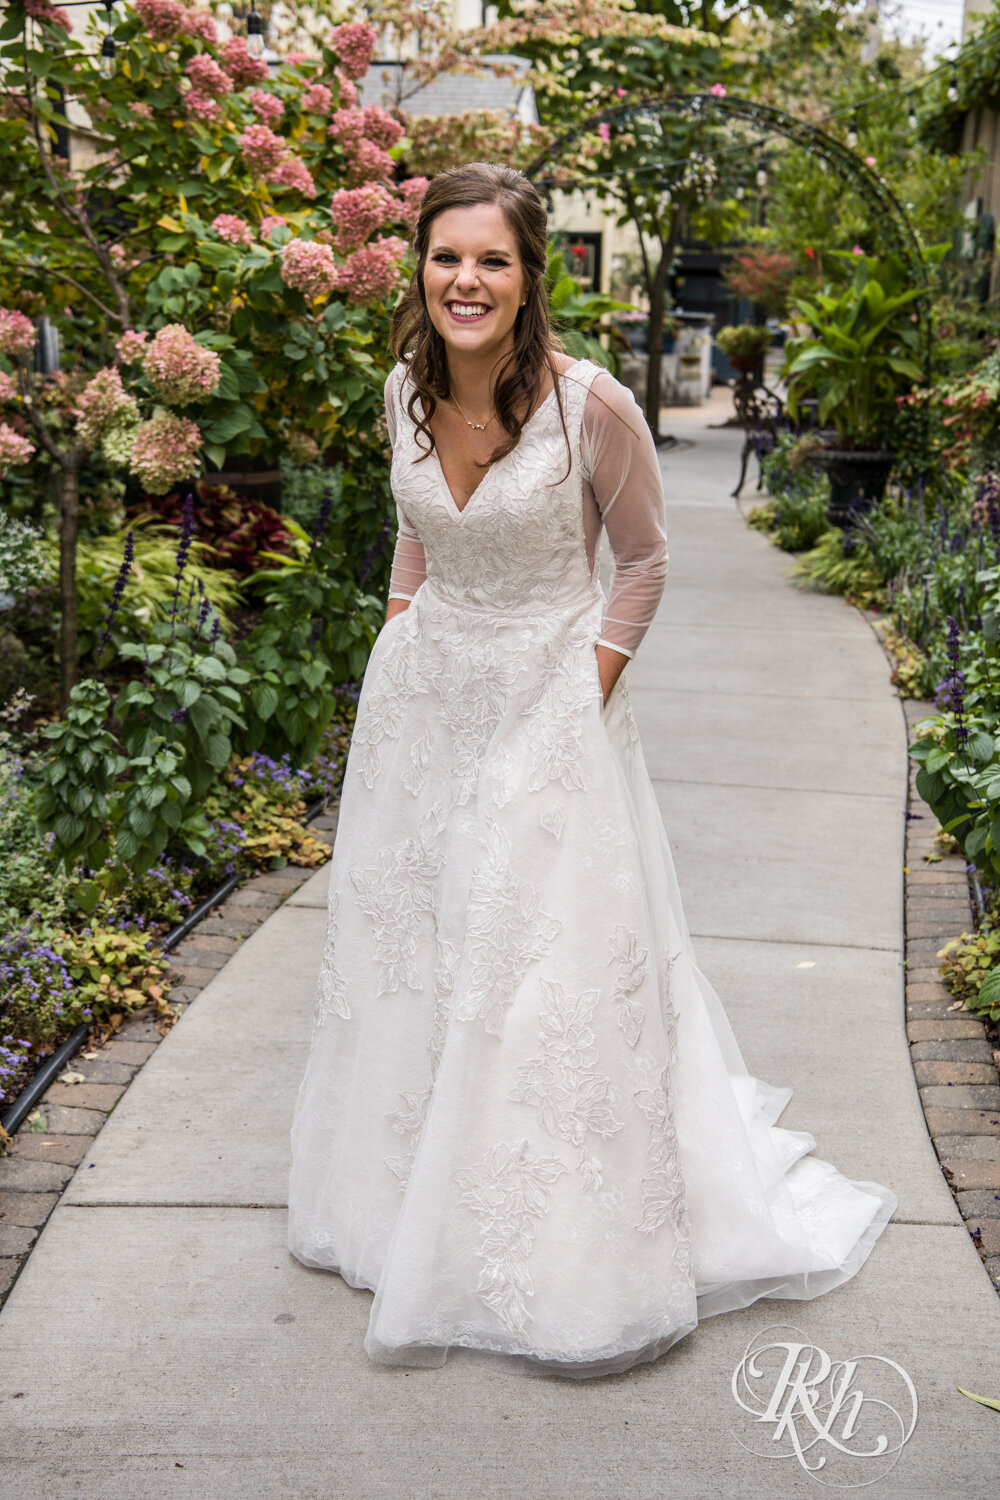 Bride smiles with hands in pockets at Kellerman's Event Center in White Bear Lake, Minnesota.